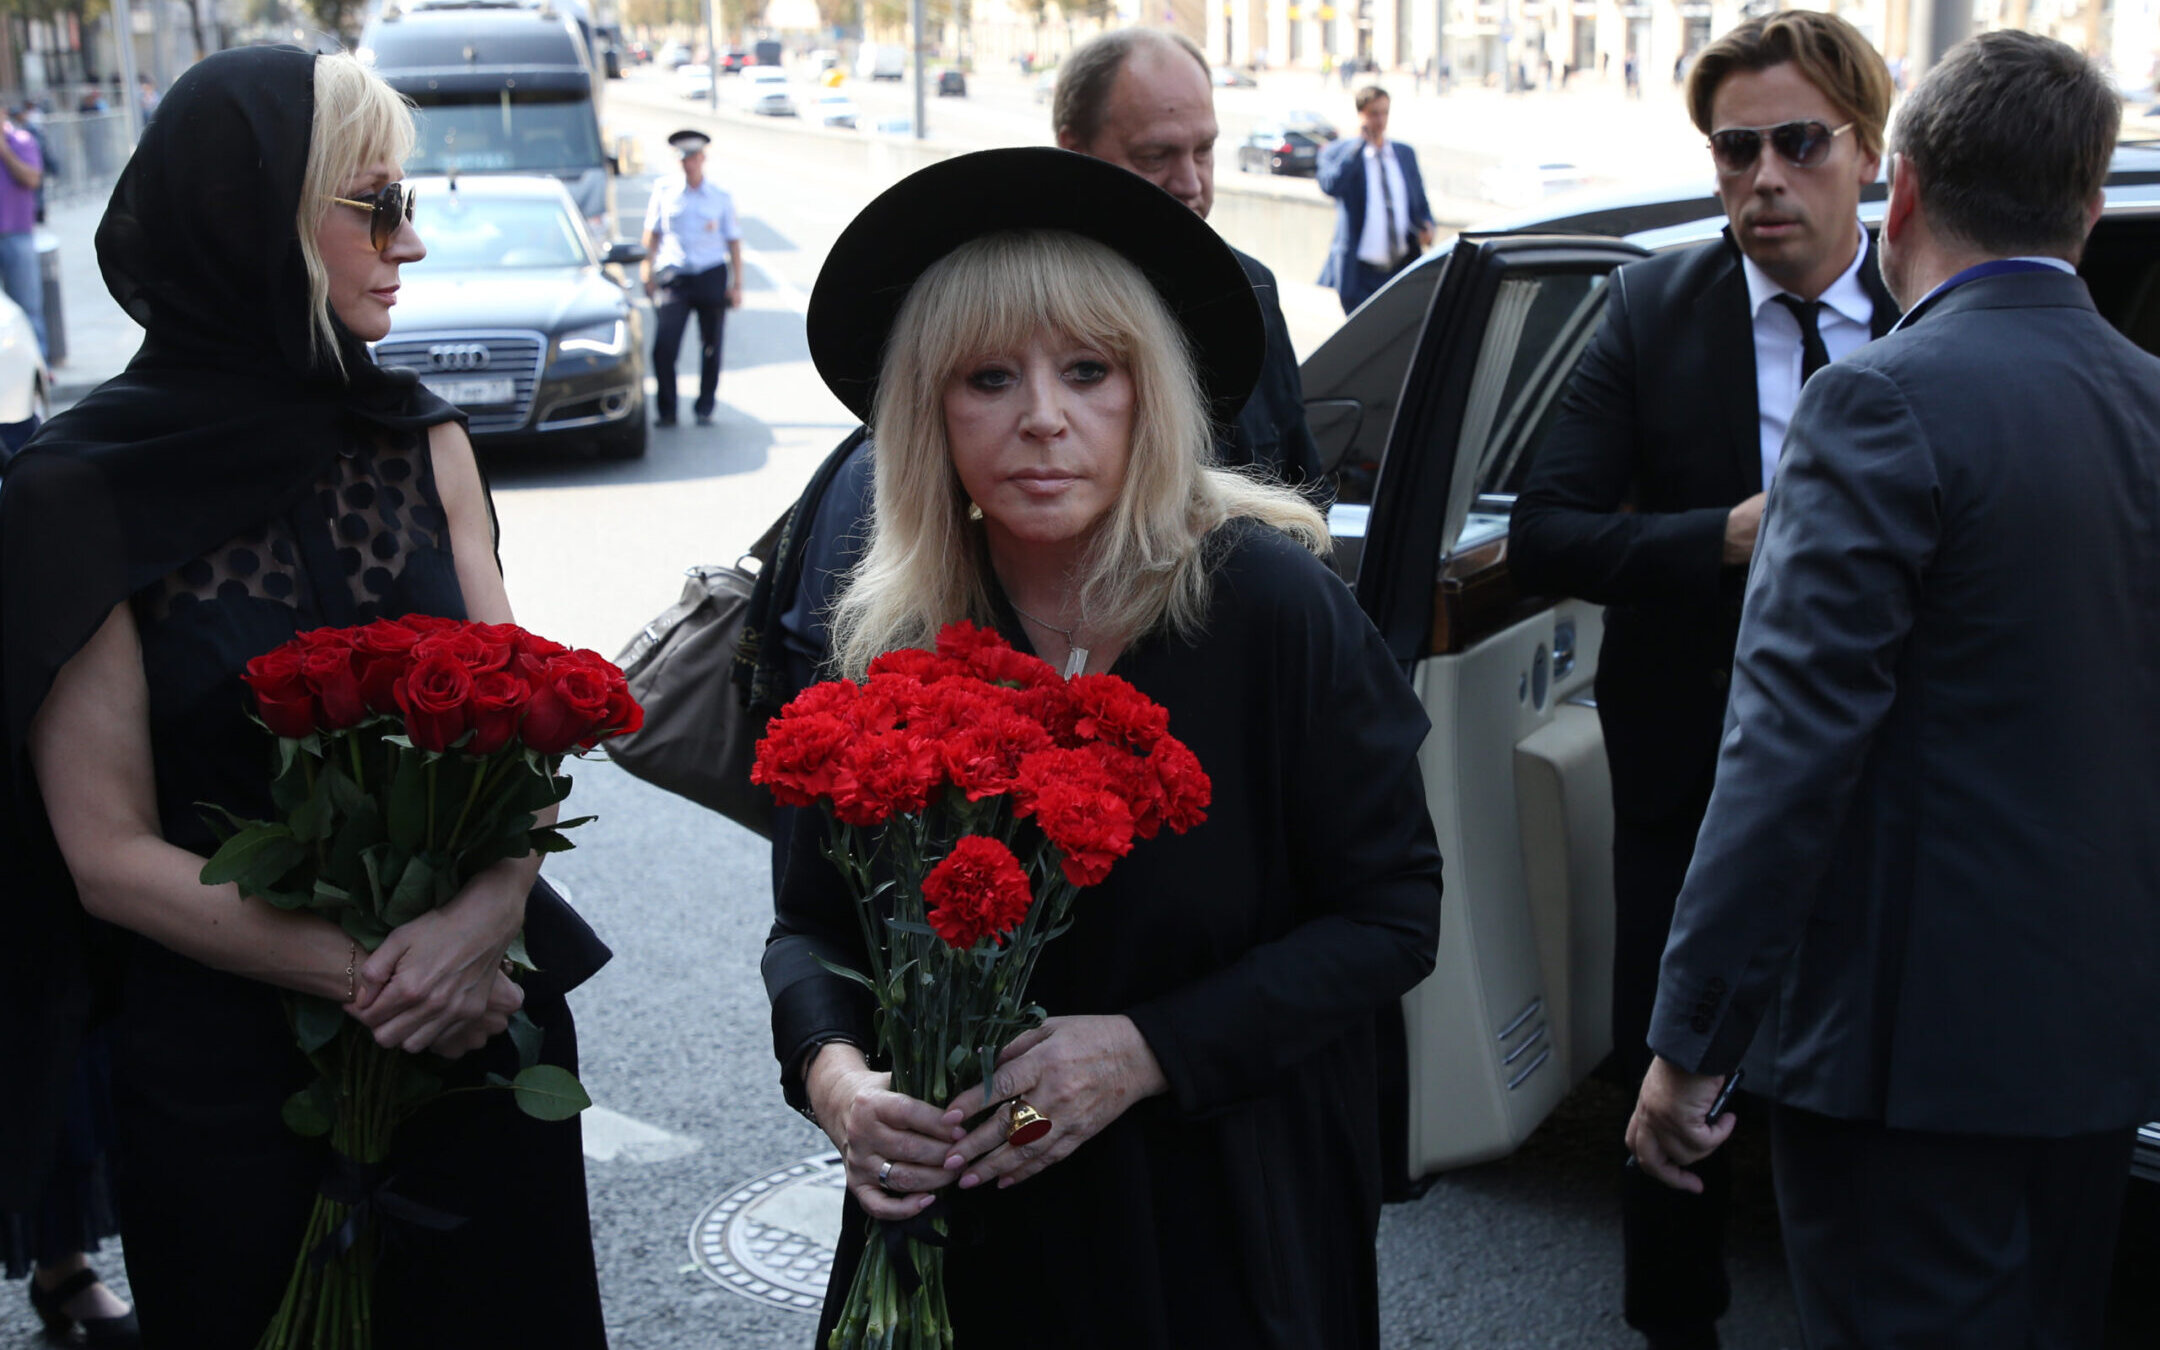 Russian pop star Alla Pugacheva and her husband Maksim Galkin, at right, arrive for the funeral of Russian singer and State Duma Deputy Joseph Kobzon in Moscow, Sept. 2, 2018.(Mikhail Svetlov/Getty Images)